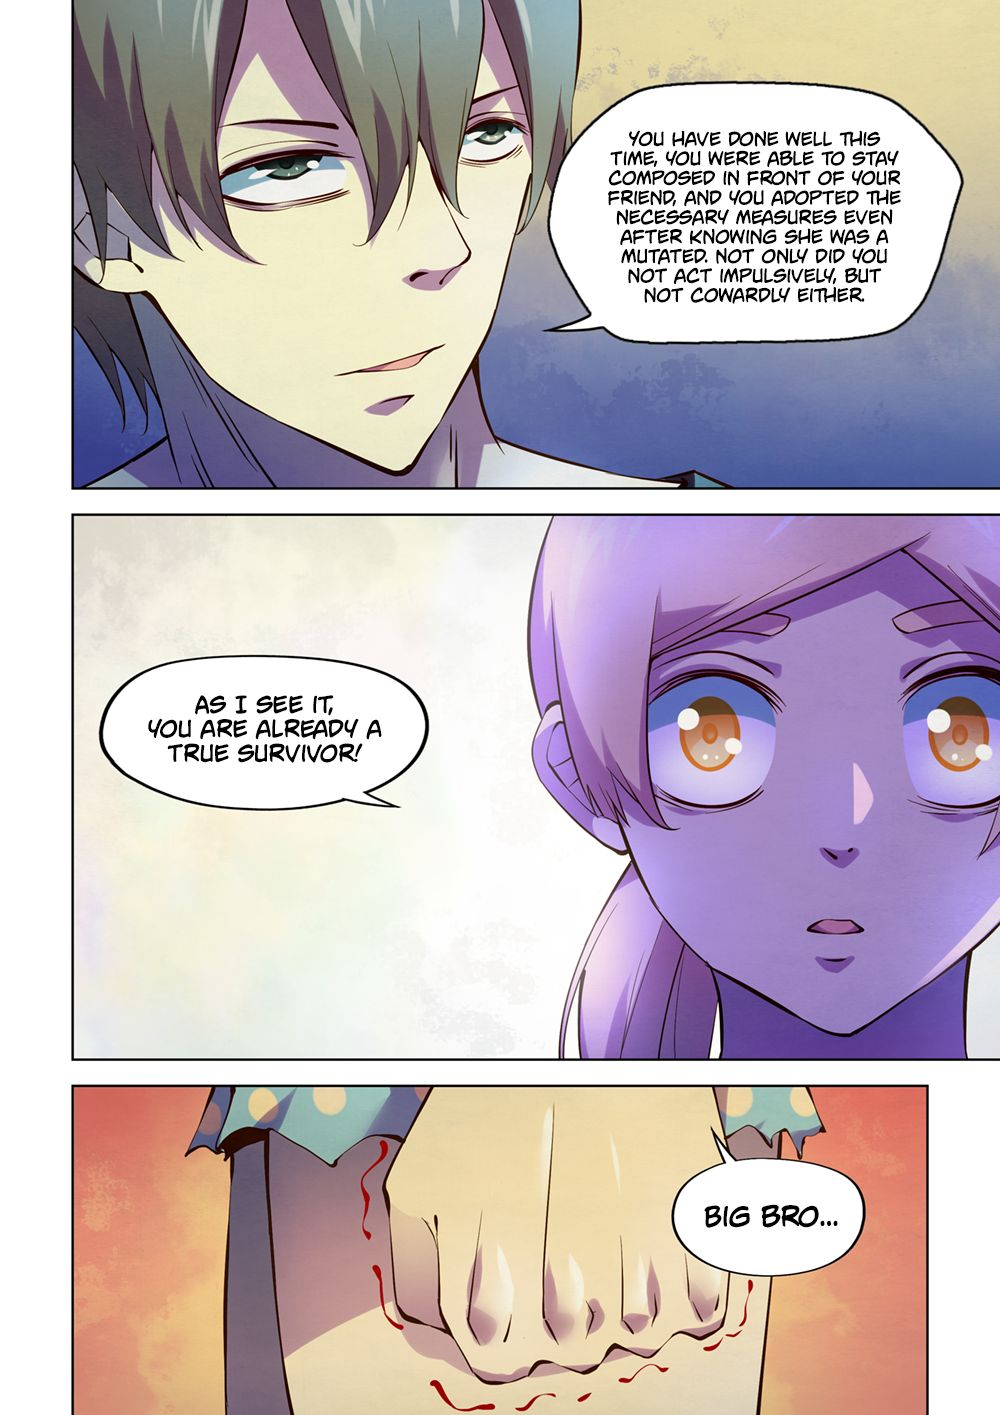 The Last Human Chapter 196 Page 6